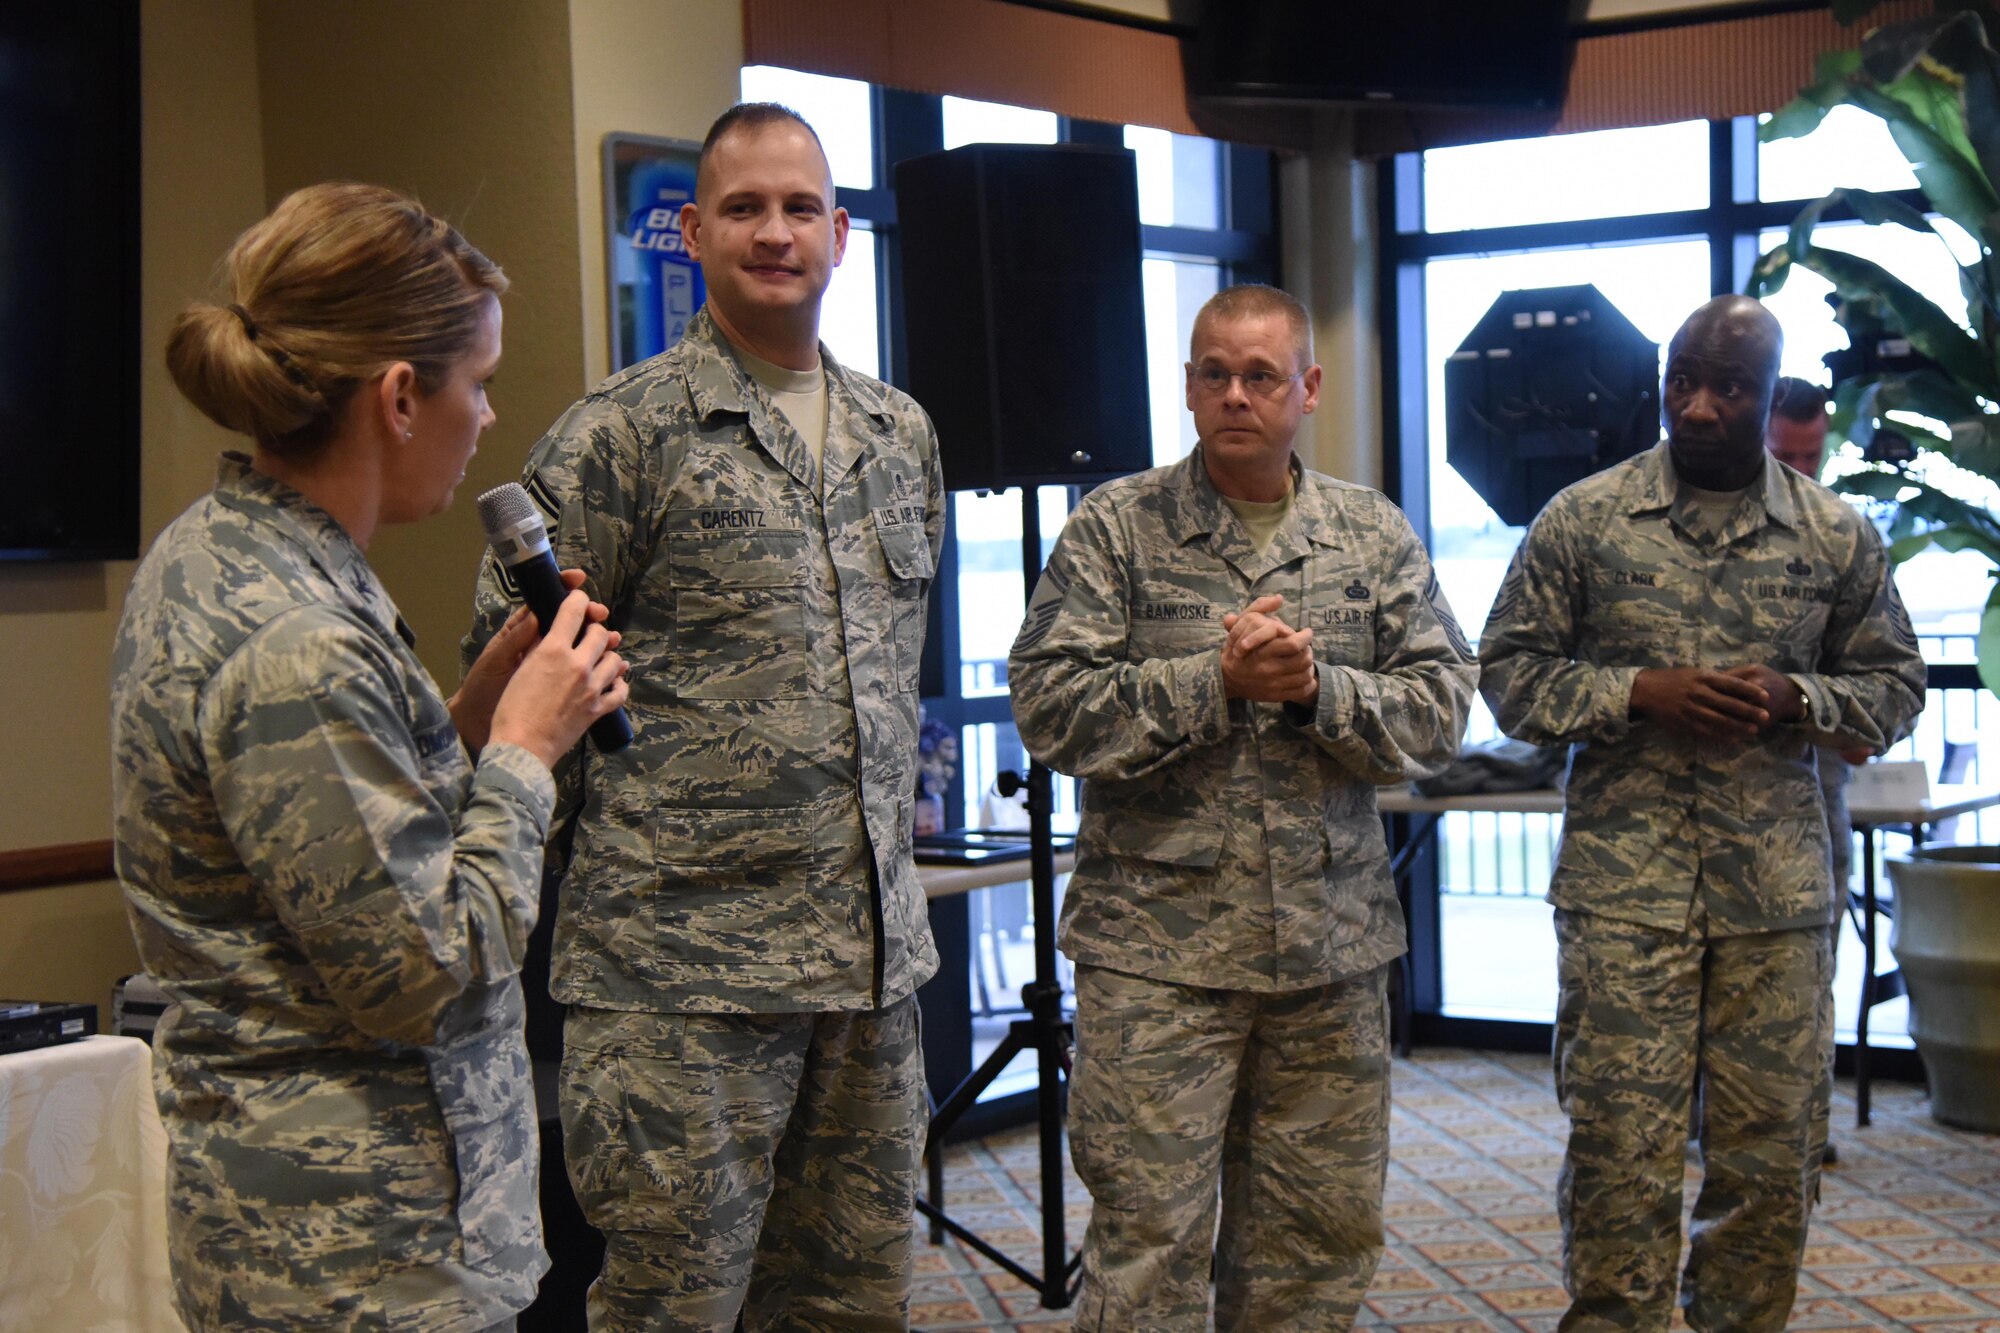 Col. Michele Edmondson, 81st Training Wing commander, delivers remarks during a chief master sergeant-select recognition ceremony at the Bay Breeze Event Center Dec. 8, 2016, on Keesler Air Force Base, Miss. She recognized three Keesler senior NCOs, Senior Master Sgts. Timothy Carentz, 81st Medical Operations Squadron superintendent, Jeffrey Bankoske, Mathies NCO Academy director of education, and Larry Jackson, 81st Operations Support Flight superintendent, for their selection to join the top 1 percent of the Air Force’s enlisted force. (U.S. Air Force photo by Kemberly Groue)